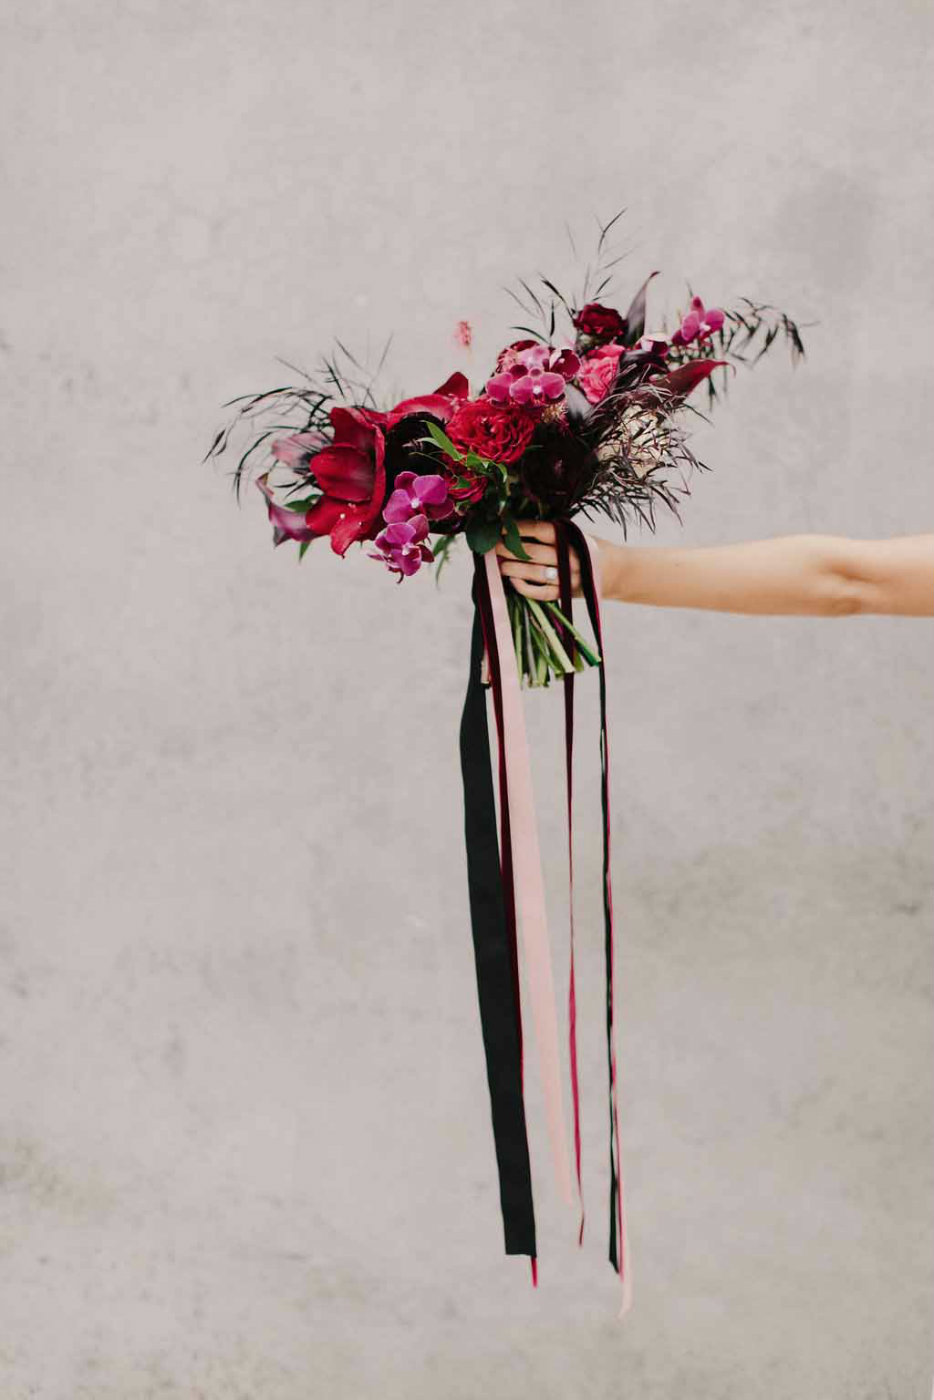 Stunning and unusual bridal bouquet with orchid, red amaryllis, black dahlias, and ranunculus with velvet streamers.